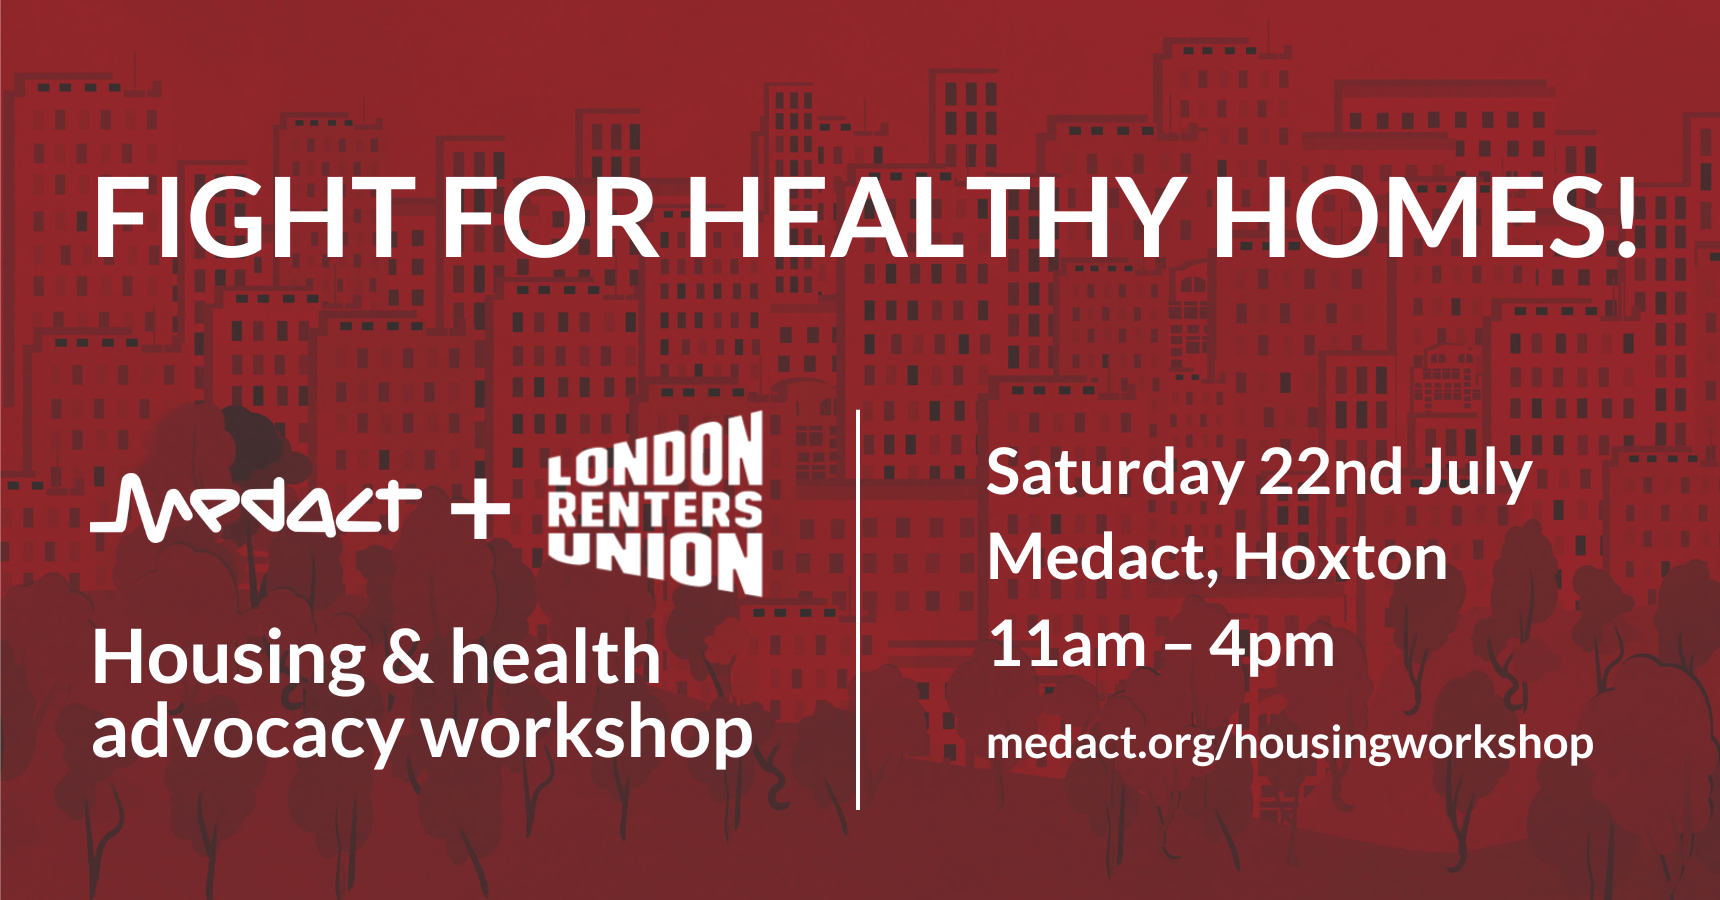 Housing & health advocacy workshop with London Renters Union